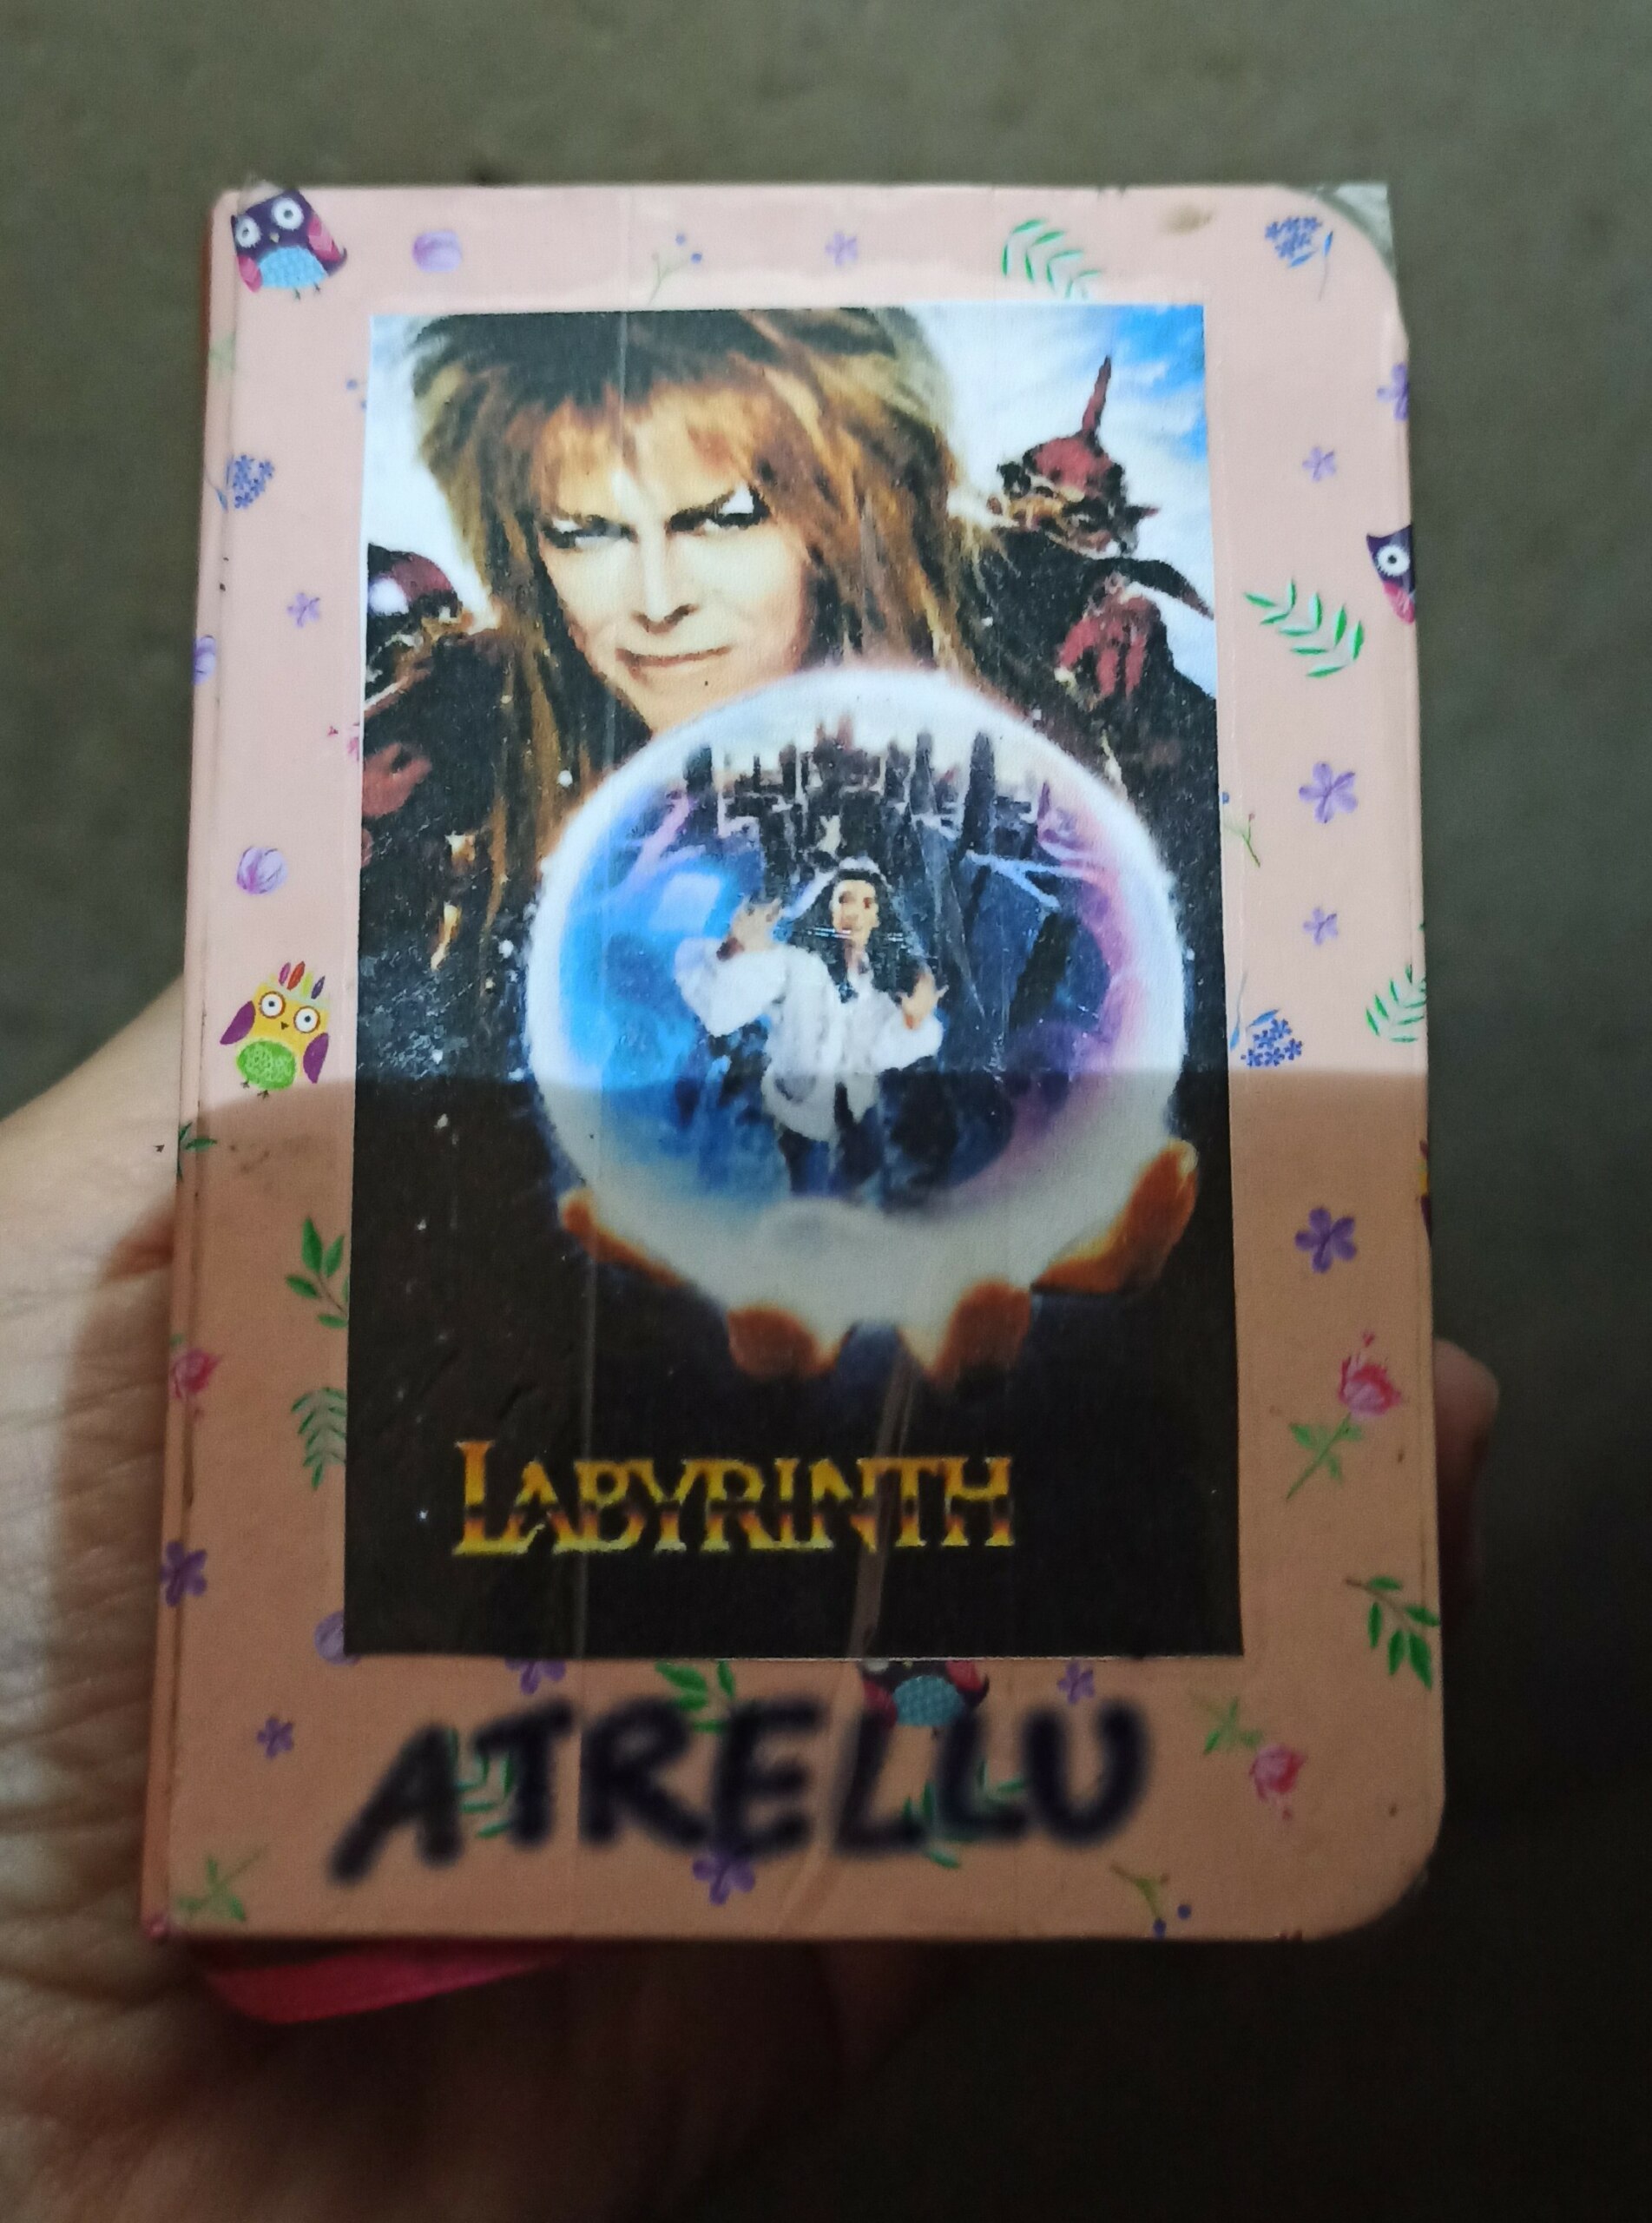 Logbook with picture of Jareth the goblin king on its cover.